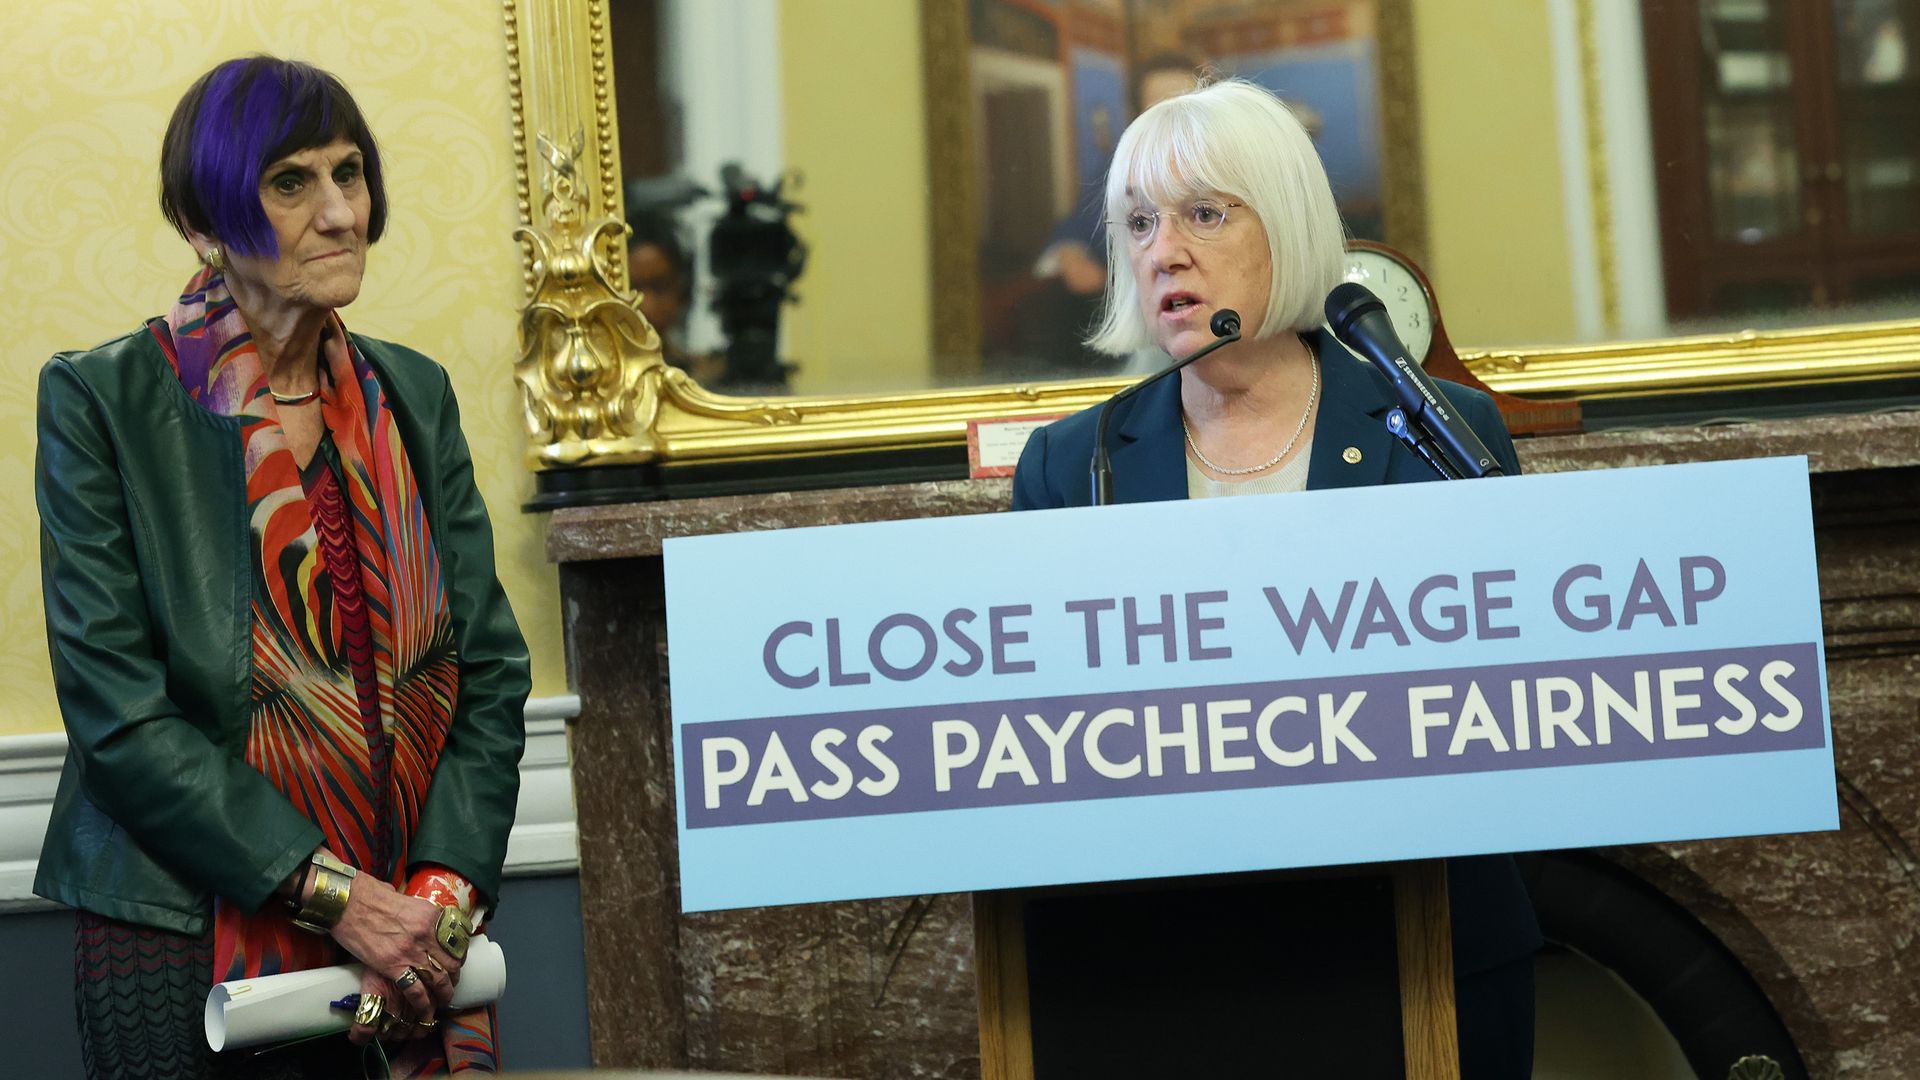 Patty Murray stands at left holding a blue sign that says "Close the Wage Gap: Pass Paycheck Fairness" as she speaks into a microphone, accompanied by another member of Congress.